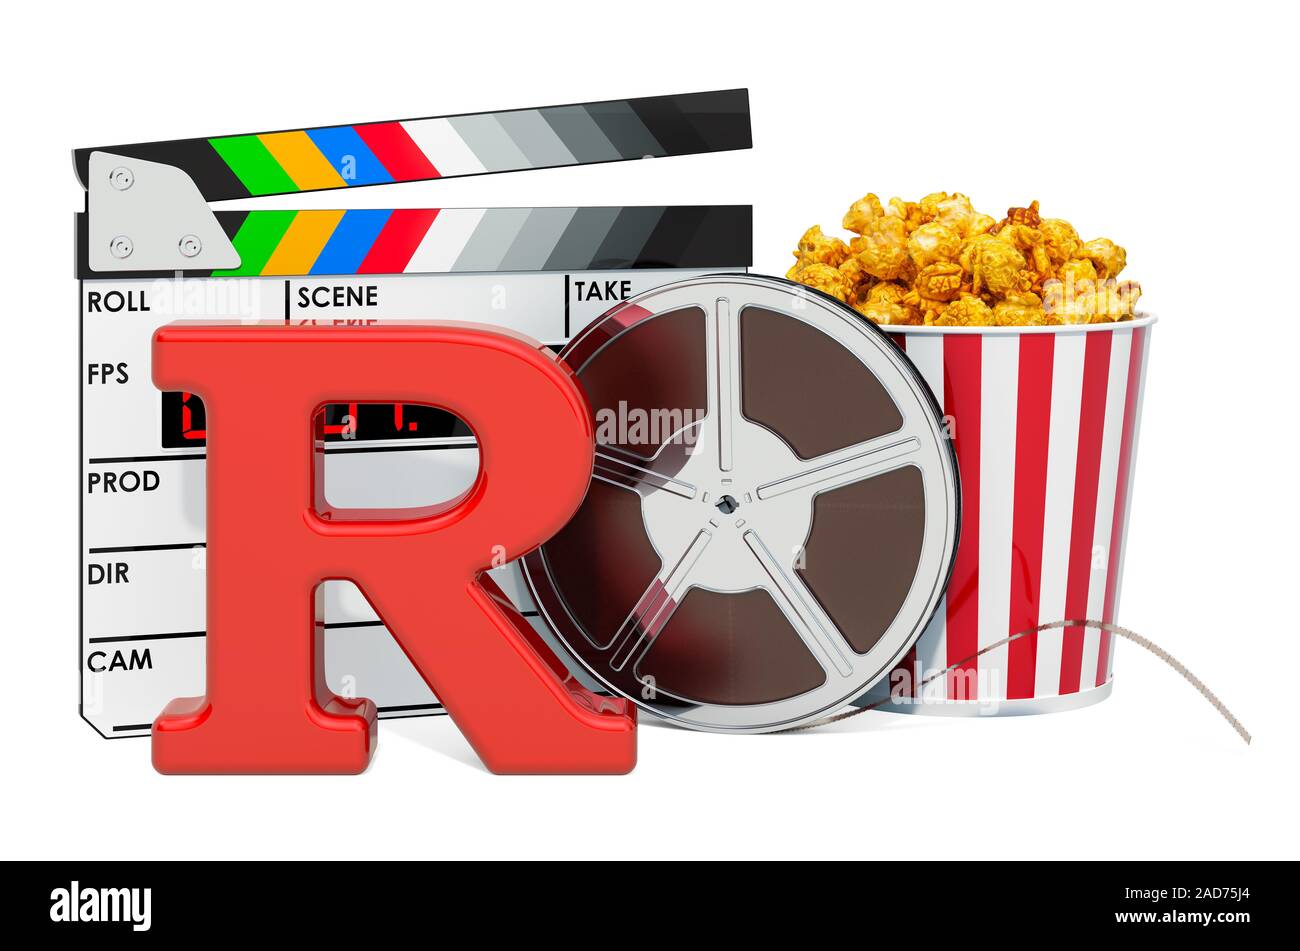 107 Movie Rating Pg Images, Stock Photos, 3D objects, & Vectors